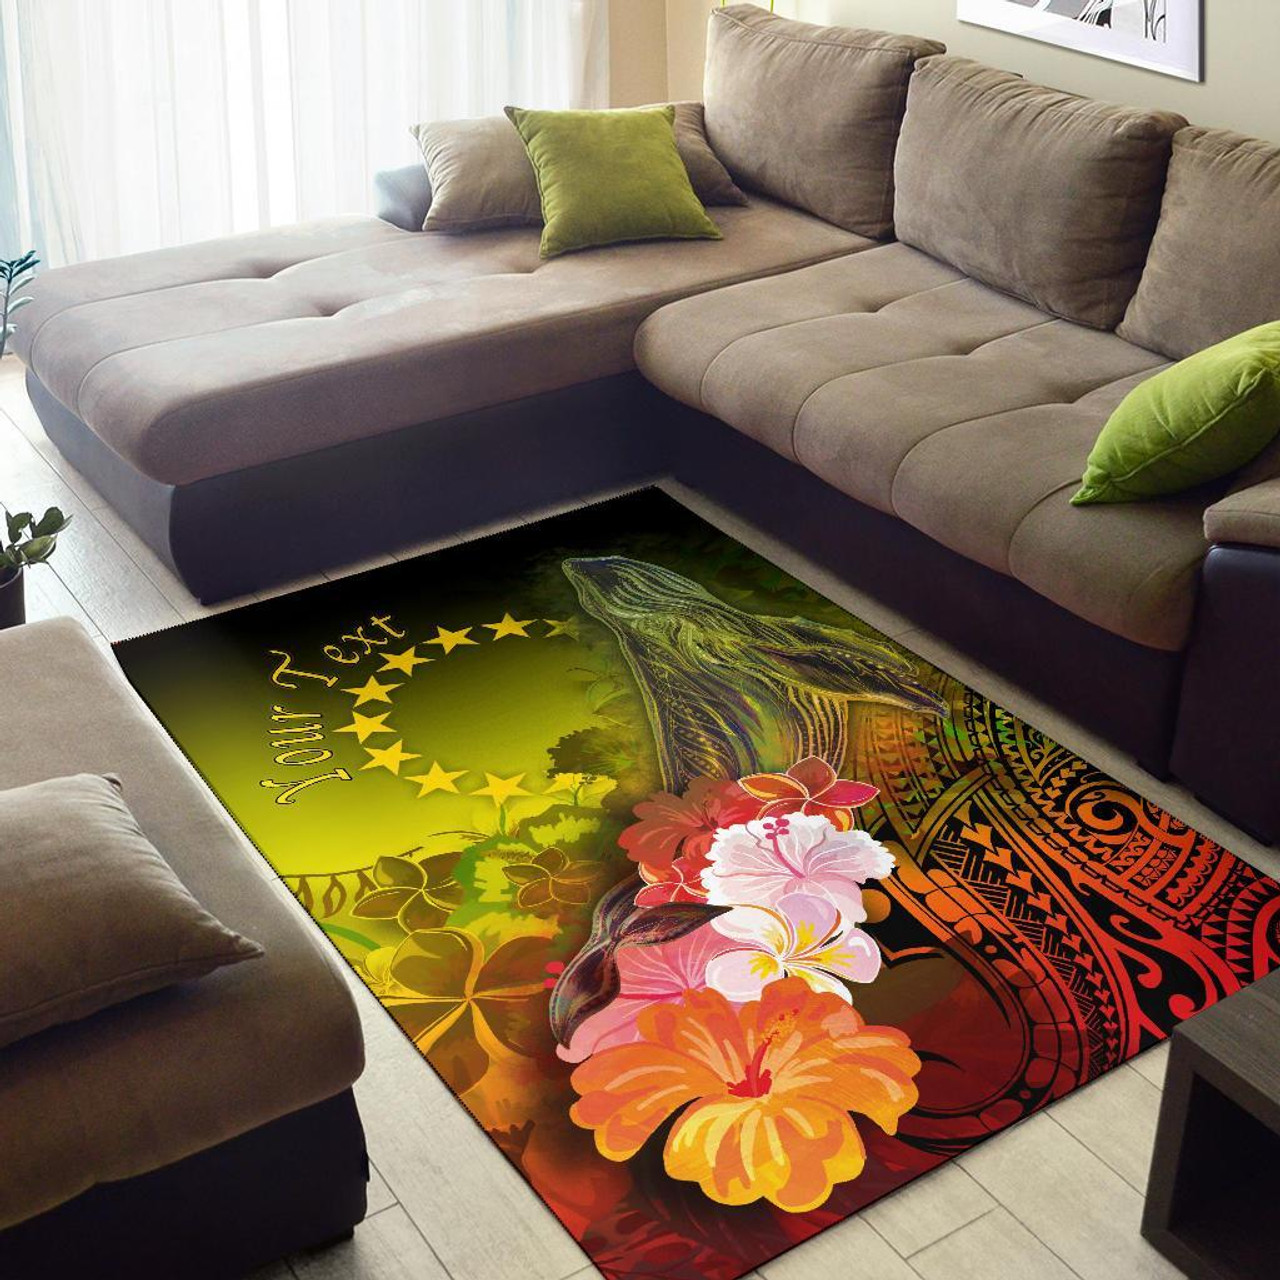 Cook Islands Custom Personalised Area Rug - Humpback Whale with Tropical Flowers (Yellow) Polynesian 2